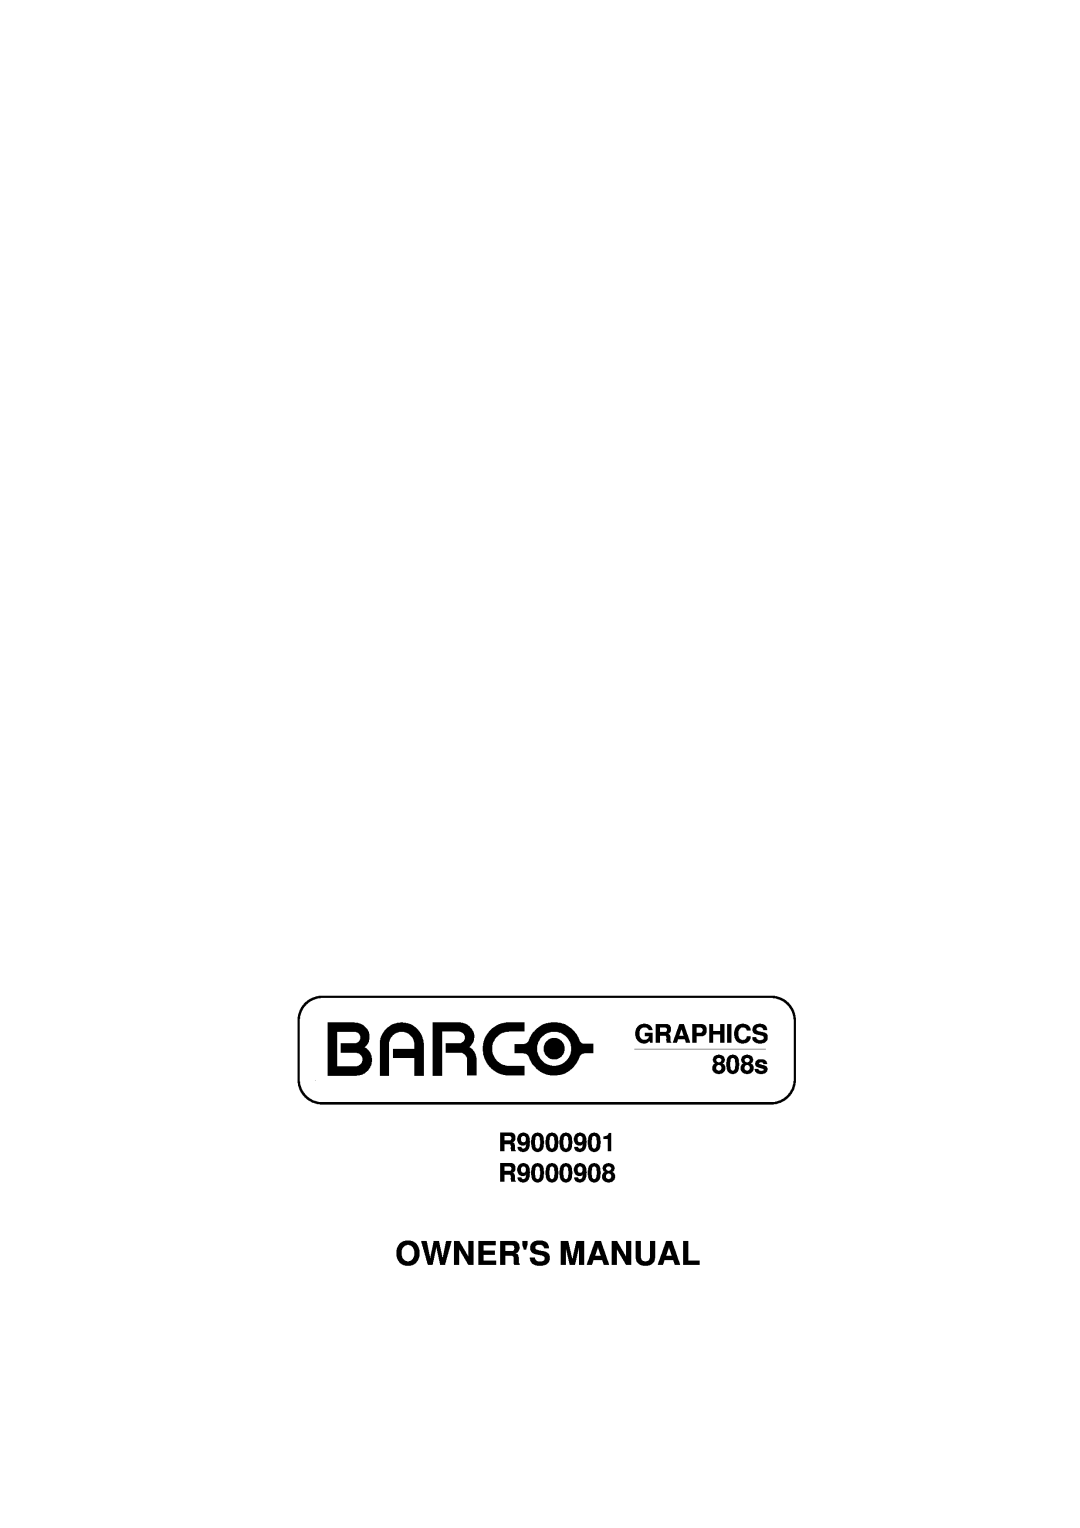 Barco owner manual Owners Manual, GRAPHICS 808s R9000901 R9000908 